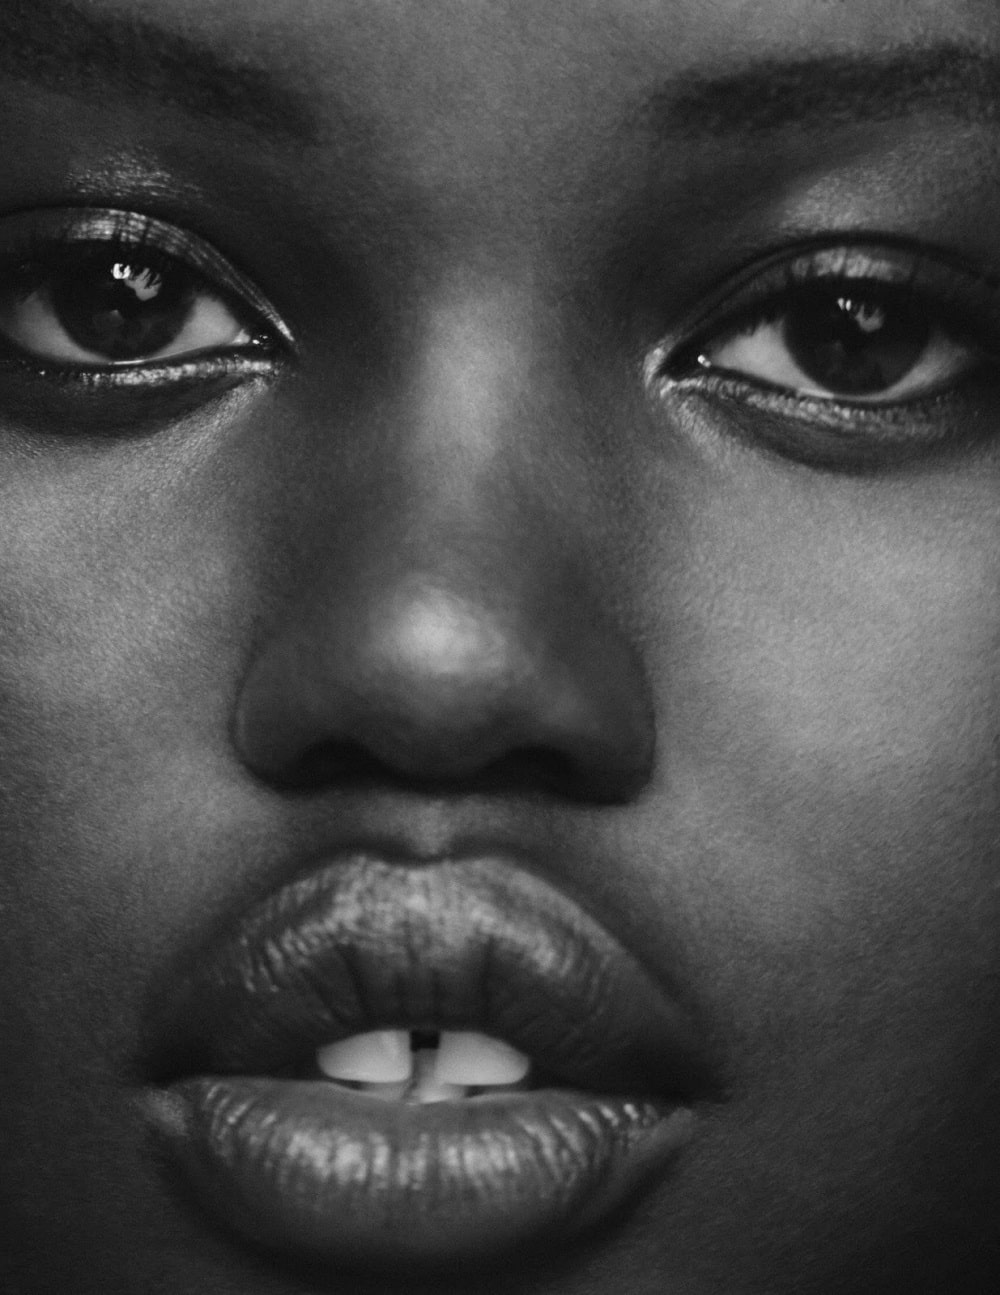 Adut Akech by Chris Colls for Vogue Germany September 2019 